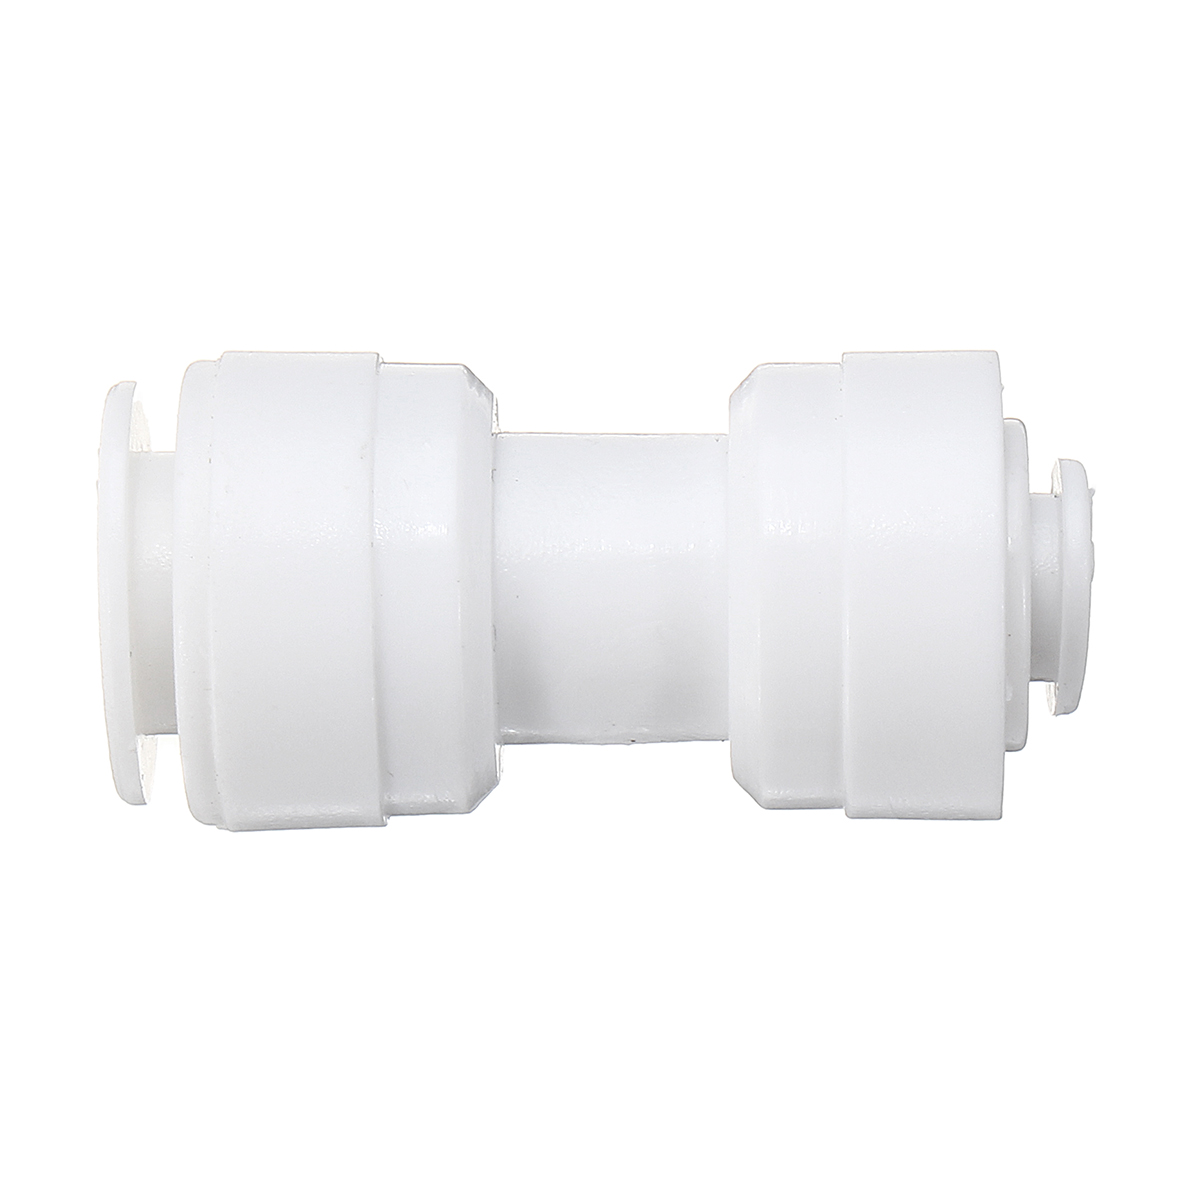 

3/8 1/4 Inch RO Grade Water Tube Quick Connect Parts Fittings Connection Pipes for Water Filters